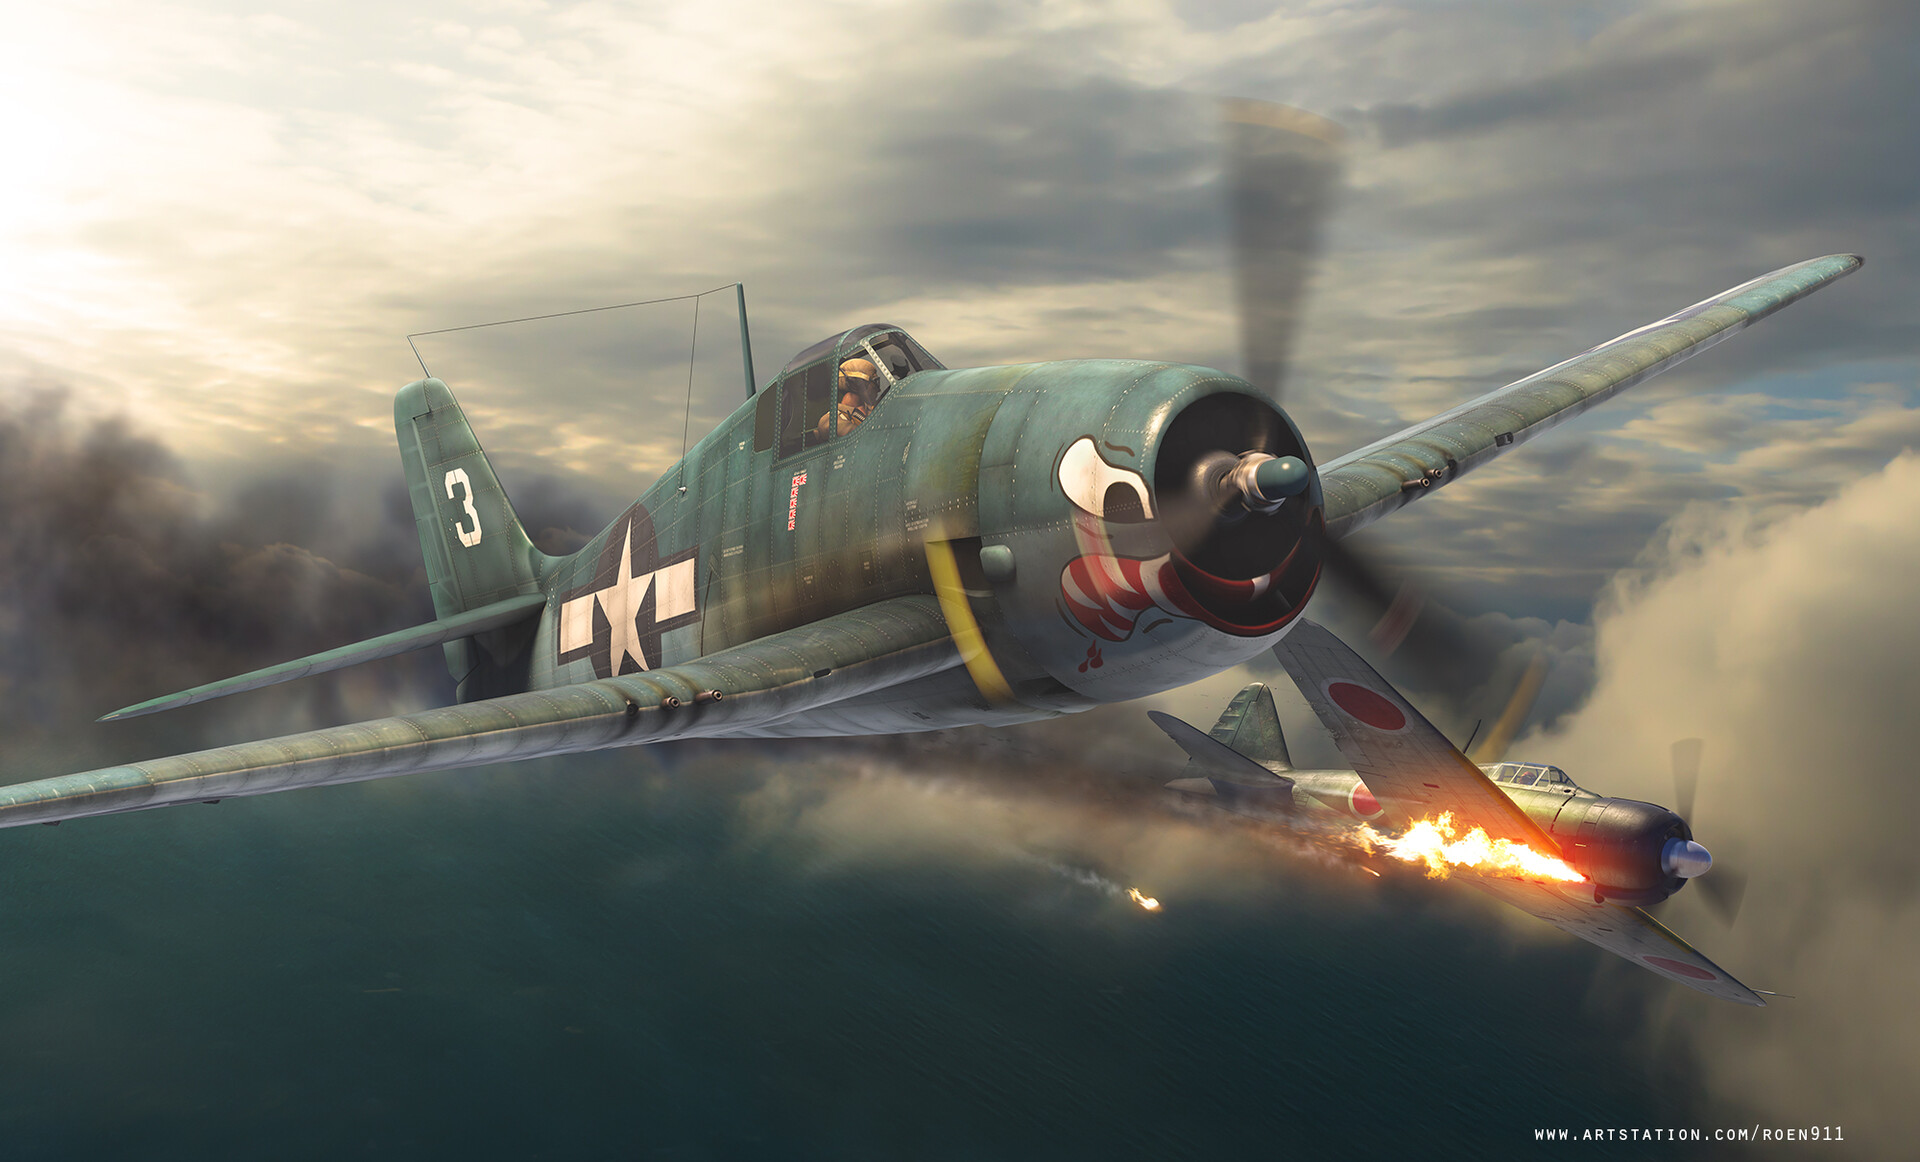 General 1920x1162 aircraft vehicle military military vehicle dogfight military aircraft artwork propeller Grumman F6F Hellcat American aircraft smoke sky clouds fire water sunlight pilot men frontal view watermarked